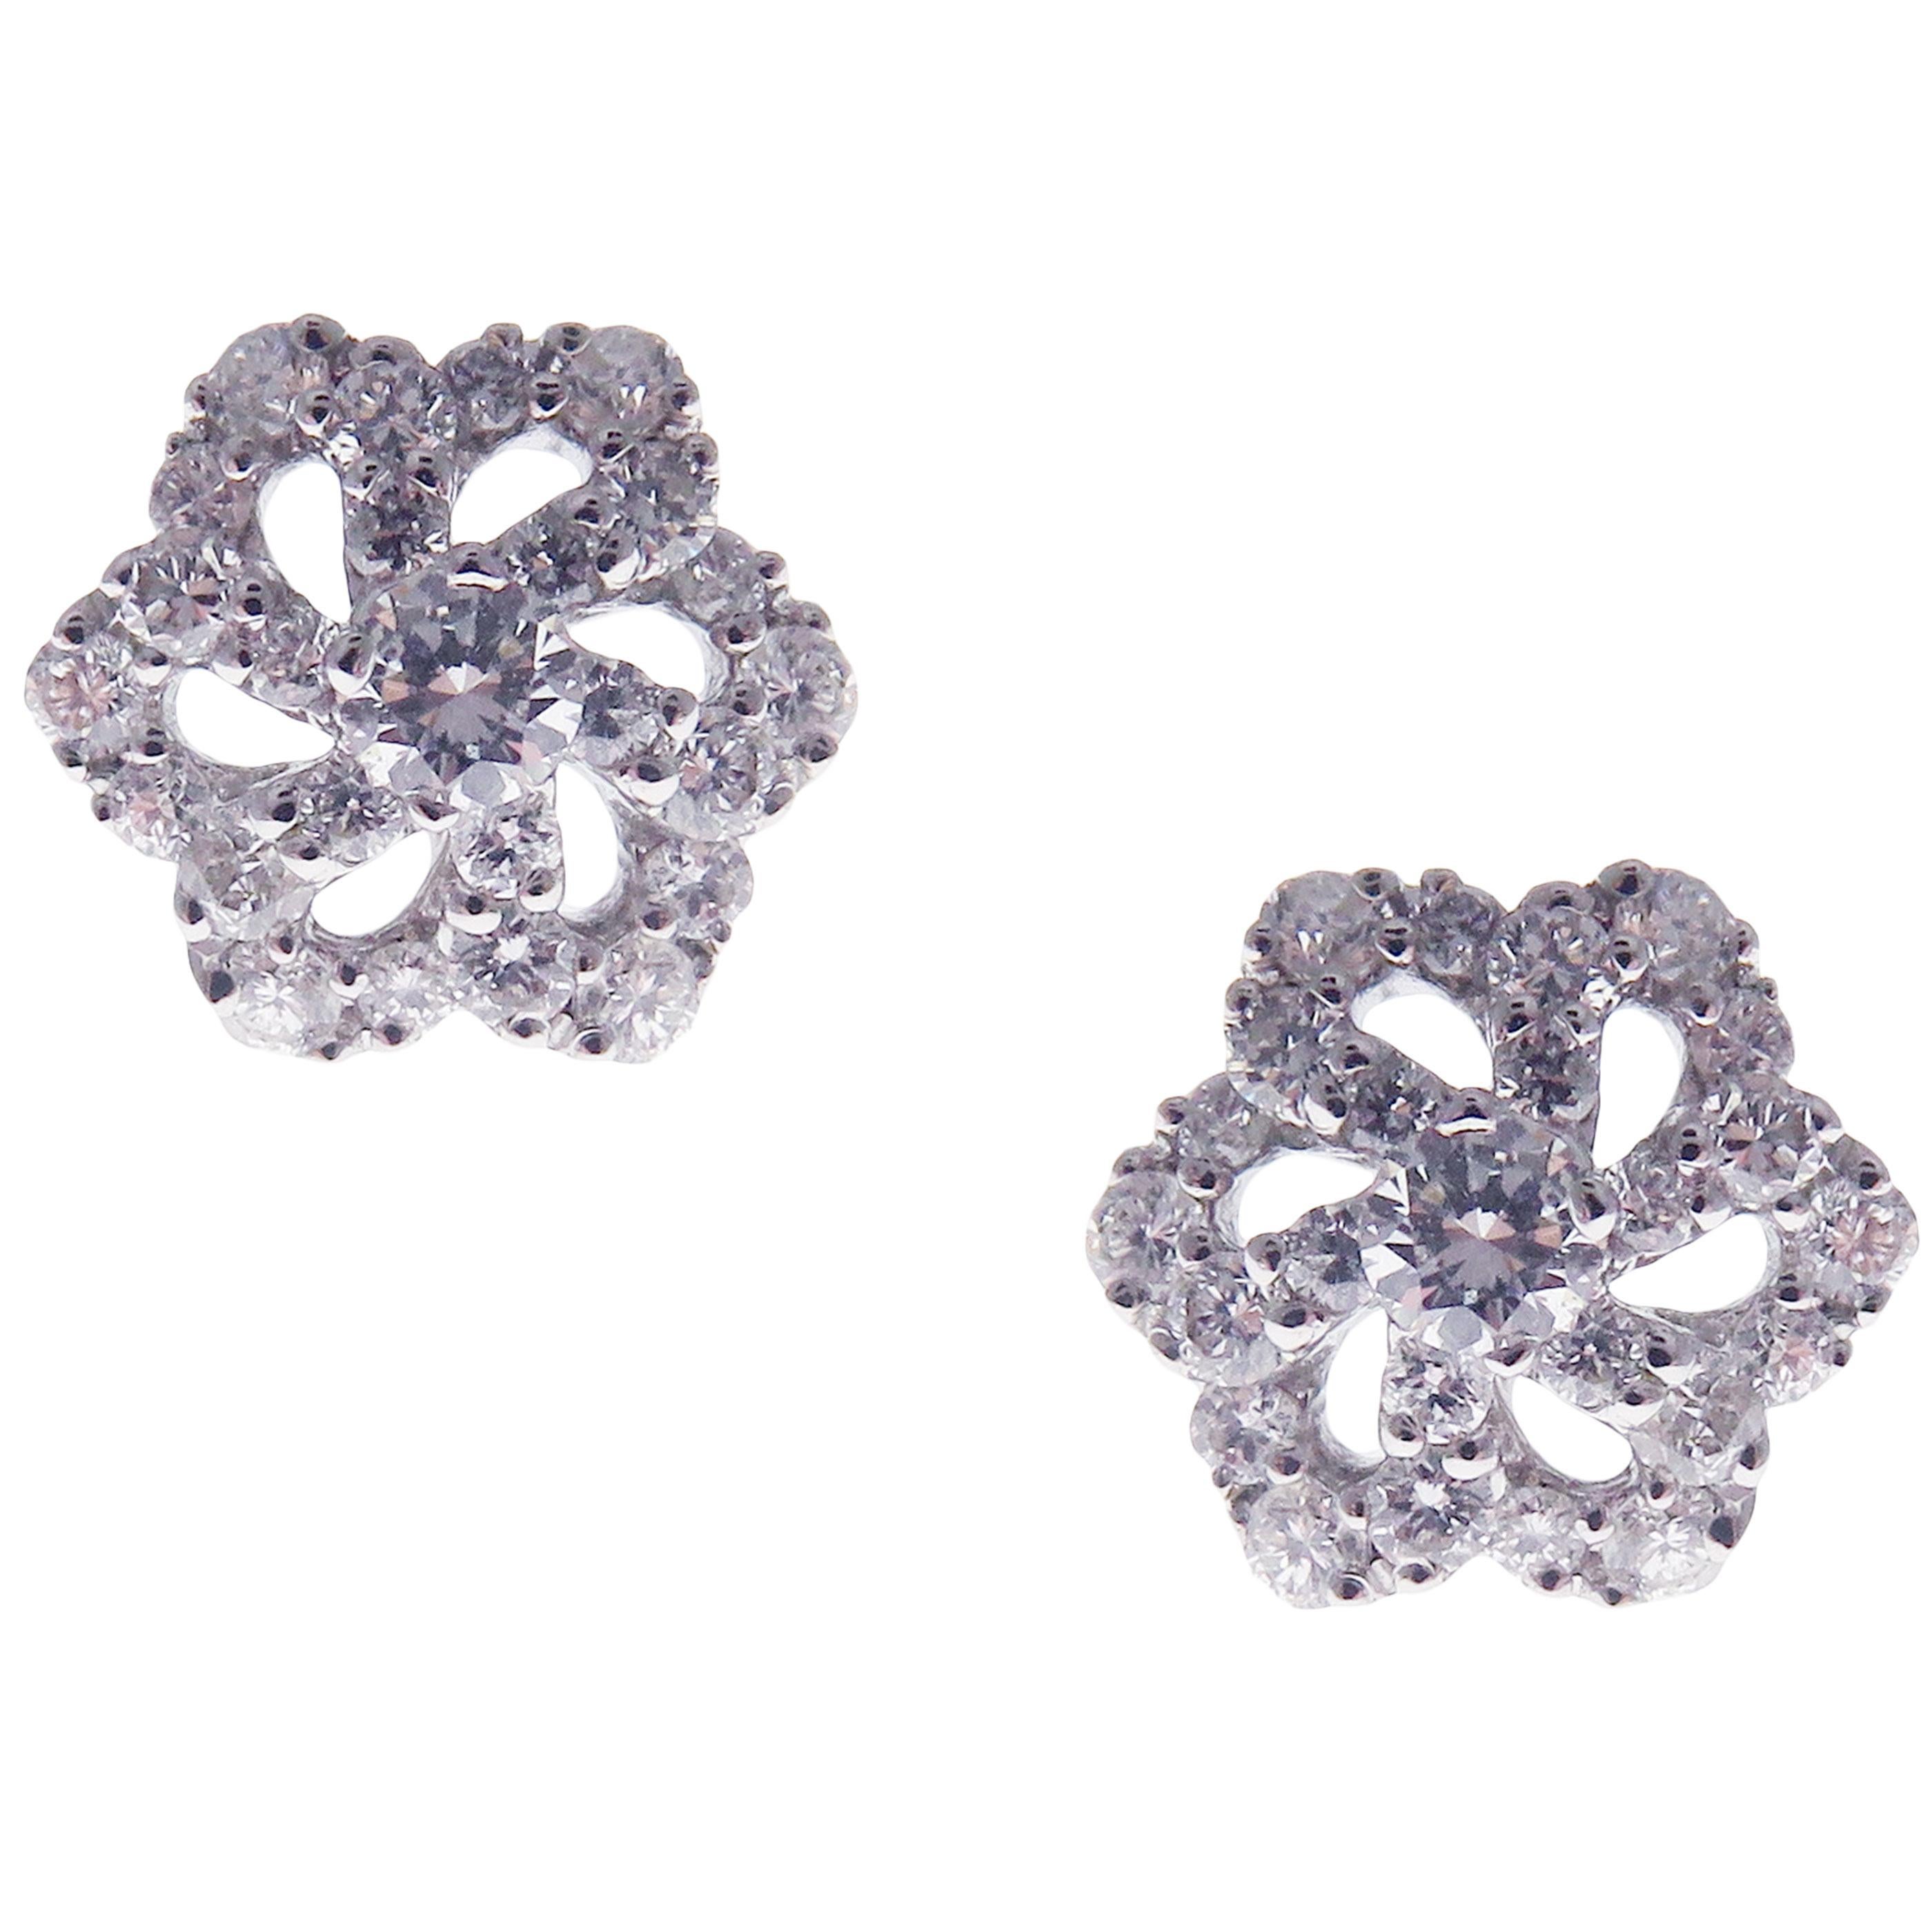 This classic diamond flower stud earring is crafted in 18-karat white gold, featuring 50 round white diamonds totaling of 0.50 carats.
Approximate total weight 2.35 grams.
These earrings come with push back post backings.
SI-G Quality natural white